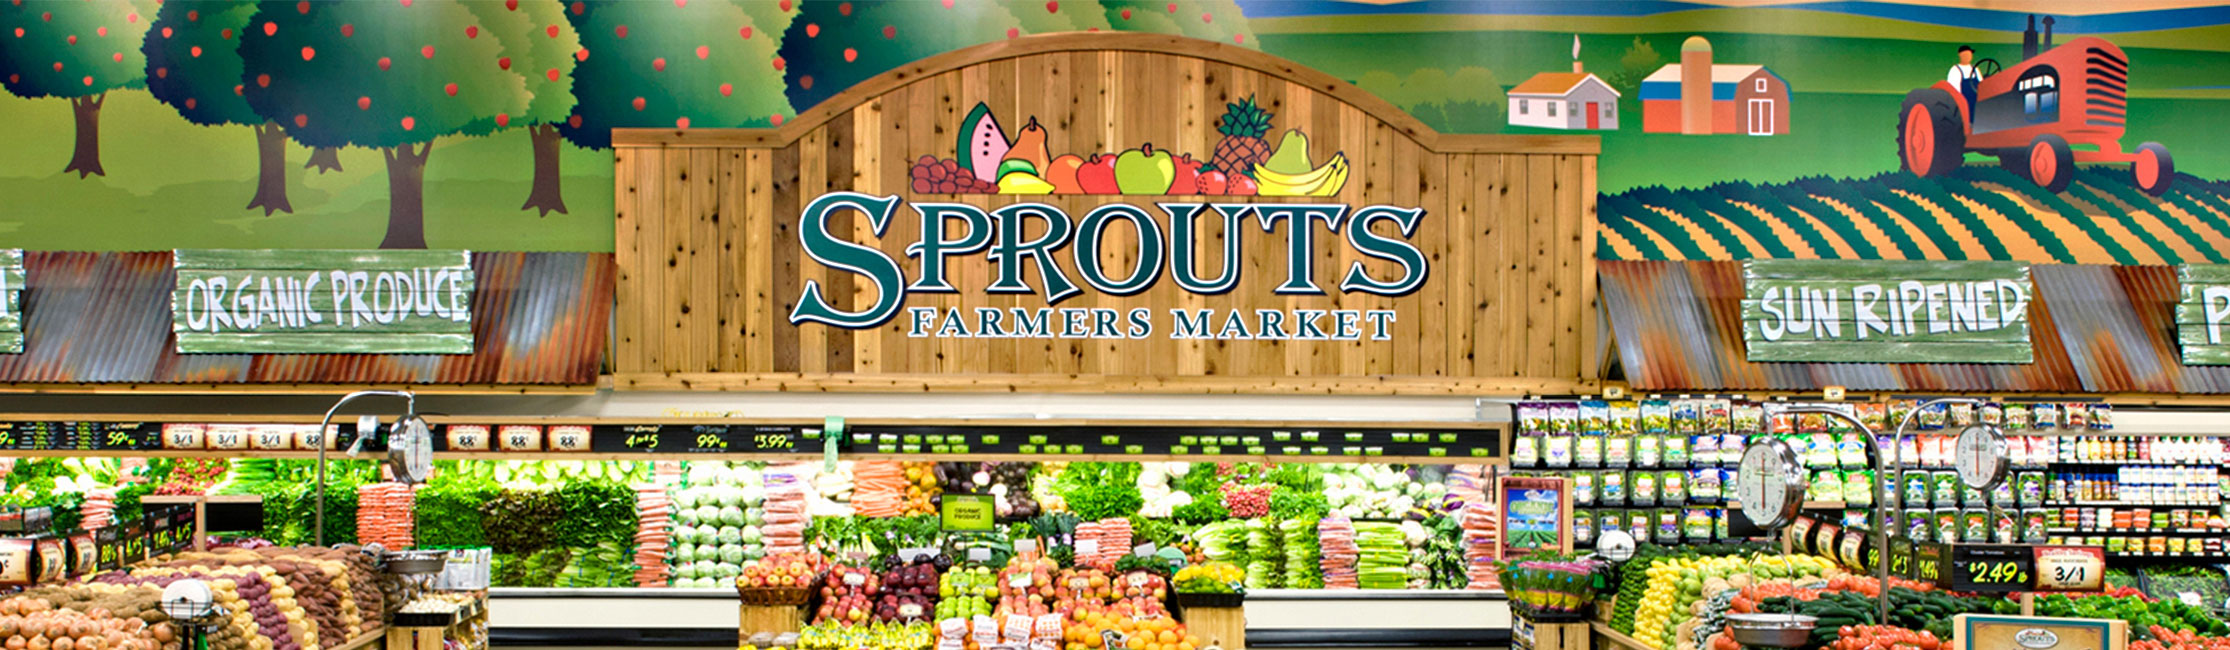 Sprouts-08-Header